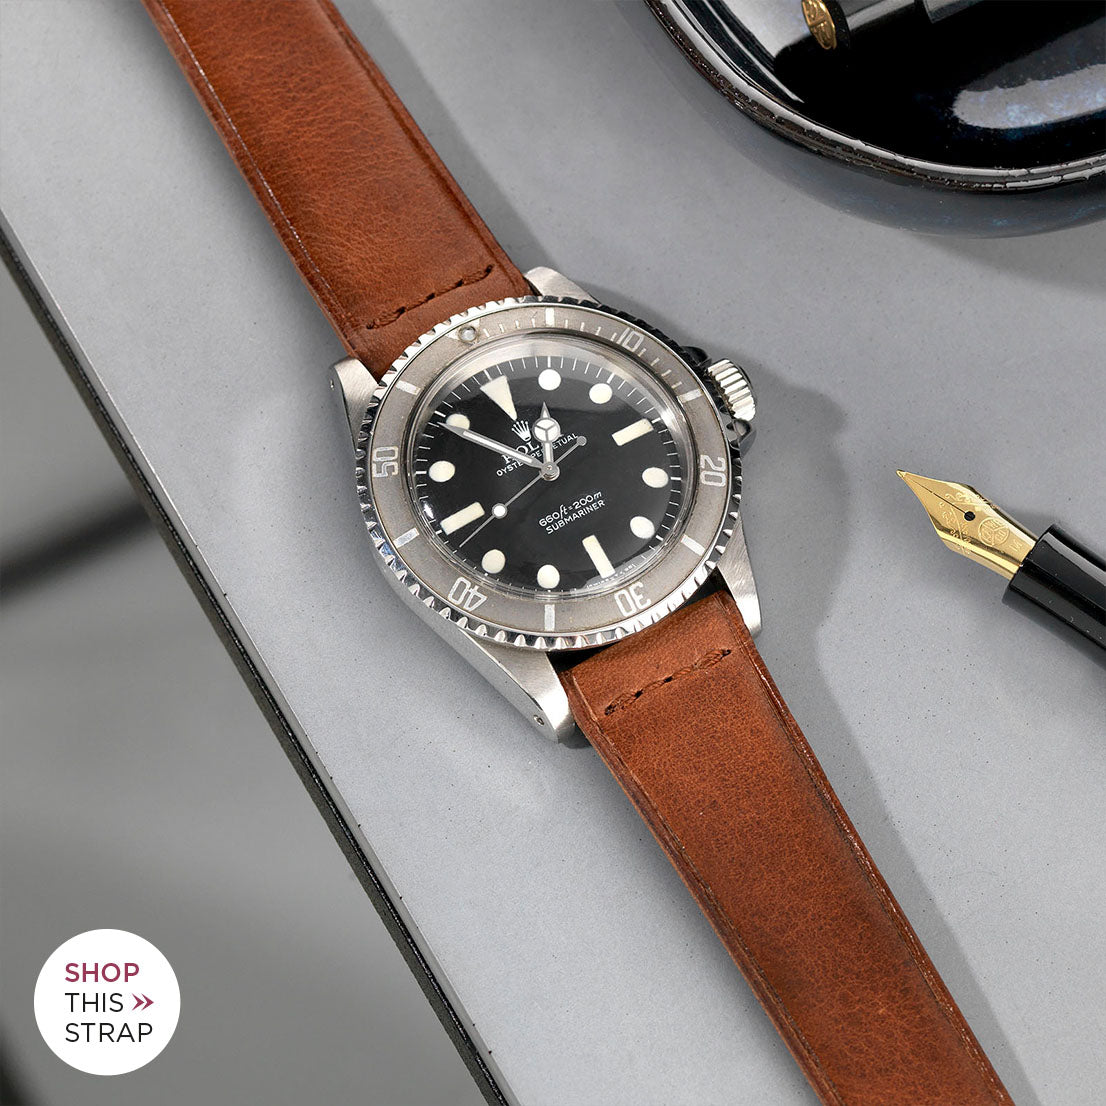 Bulang and Sons_Strap Guide_The Rolex 5513 Faded Maxi Submariner_Siena Brown Extra Thin Leather Watch Strap